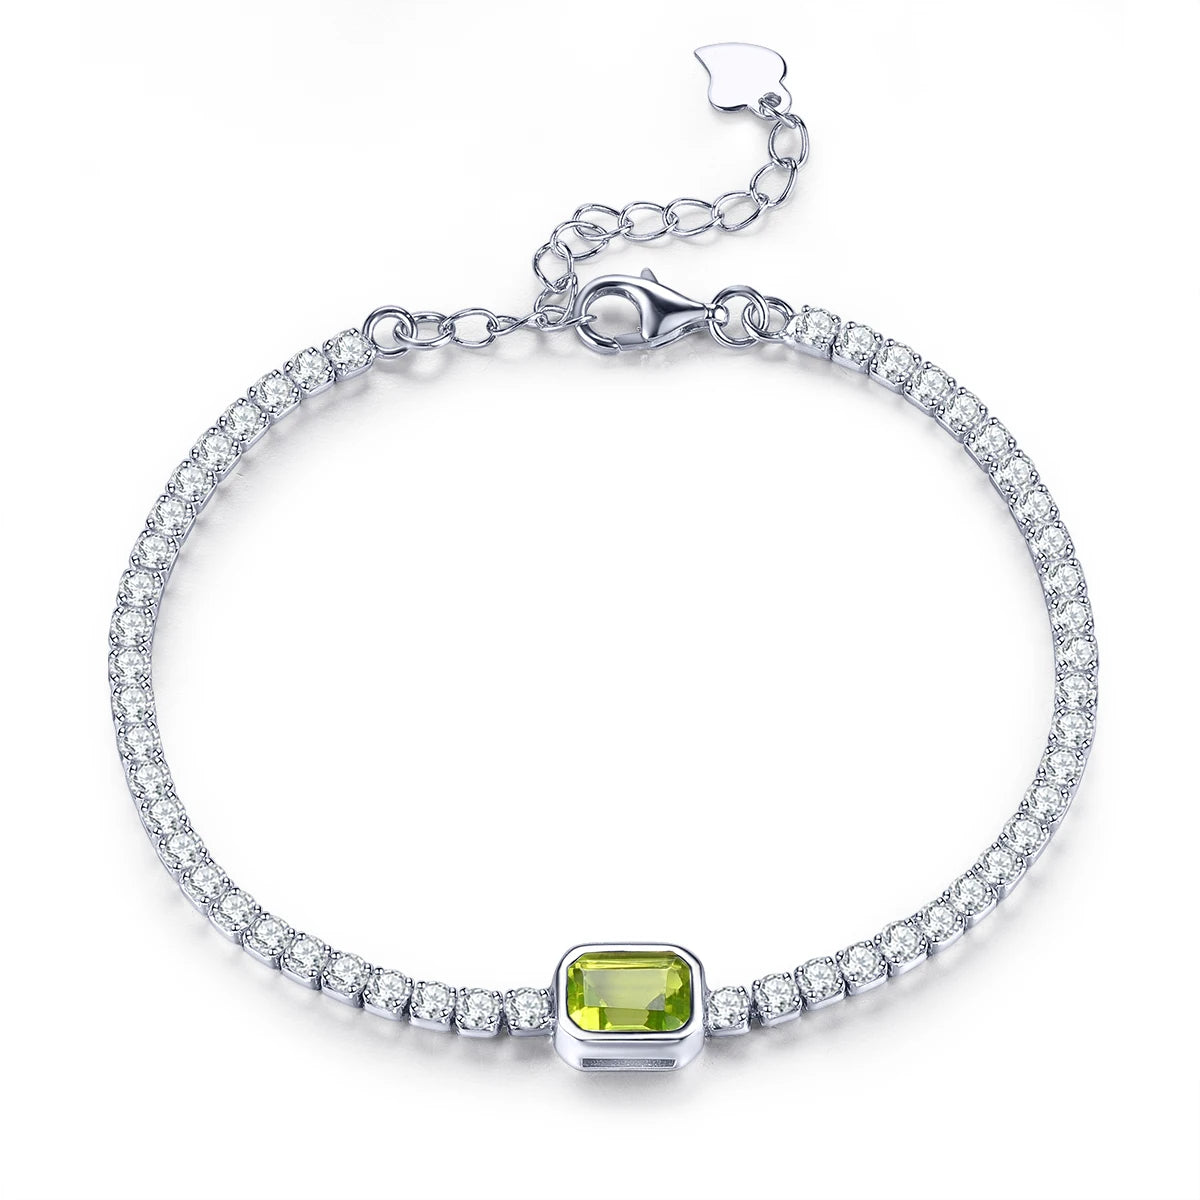 Natural Peridot Sterling Silver Bracelet S925 Jewelry 1.23 Carats Genuine Colorful Gemstone Classic Simple Style Top Quality